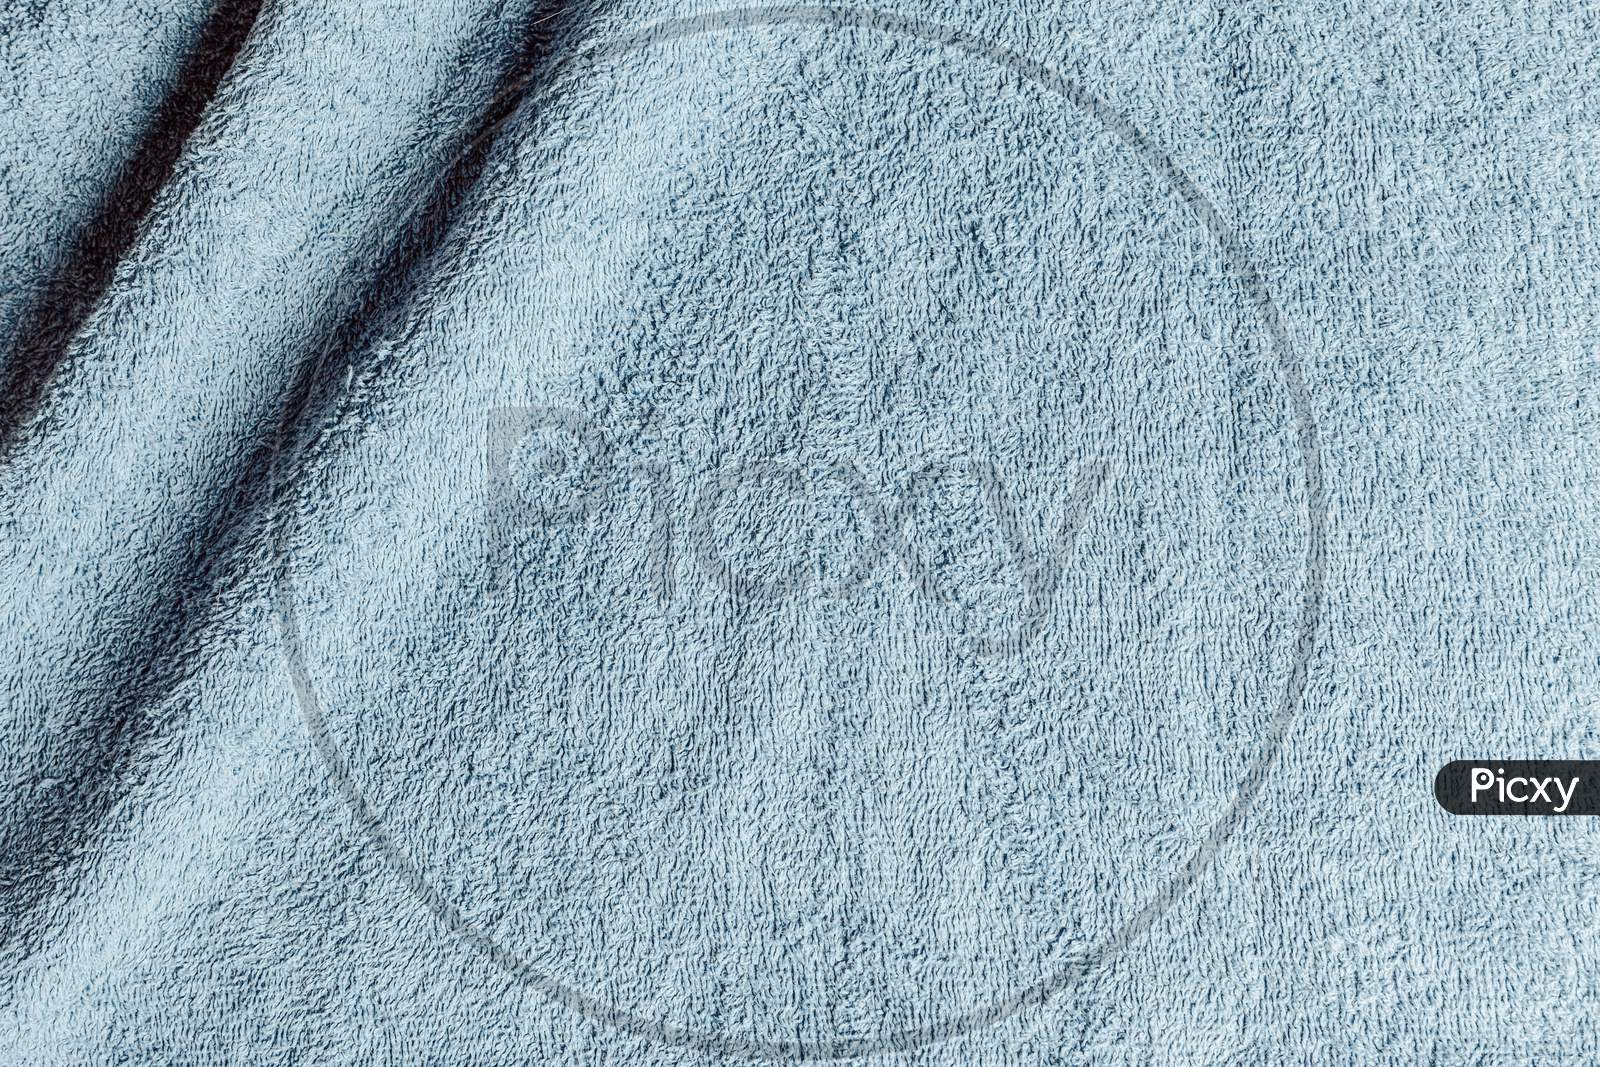 Top View From The Top Of A Light Blue Towel With Two Wrinkles